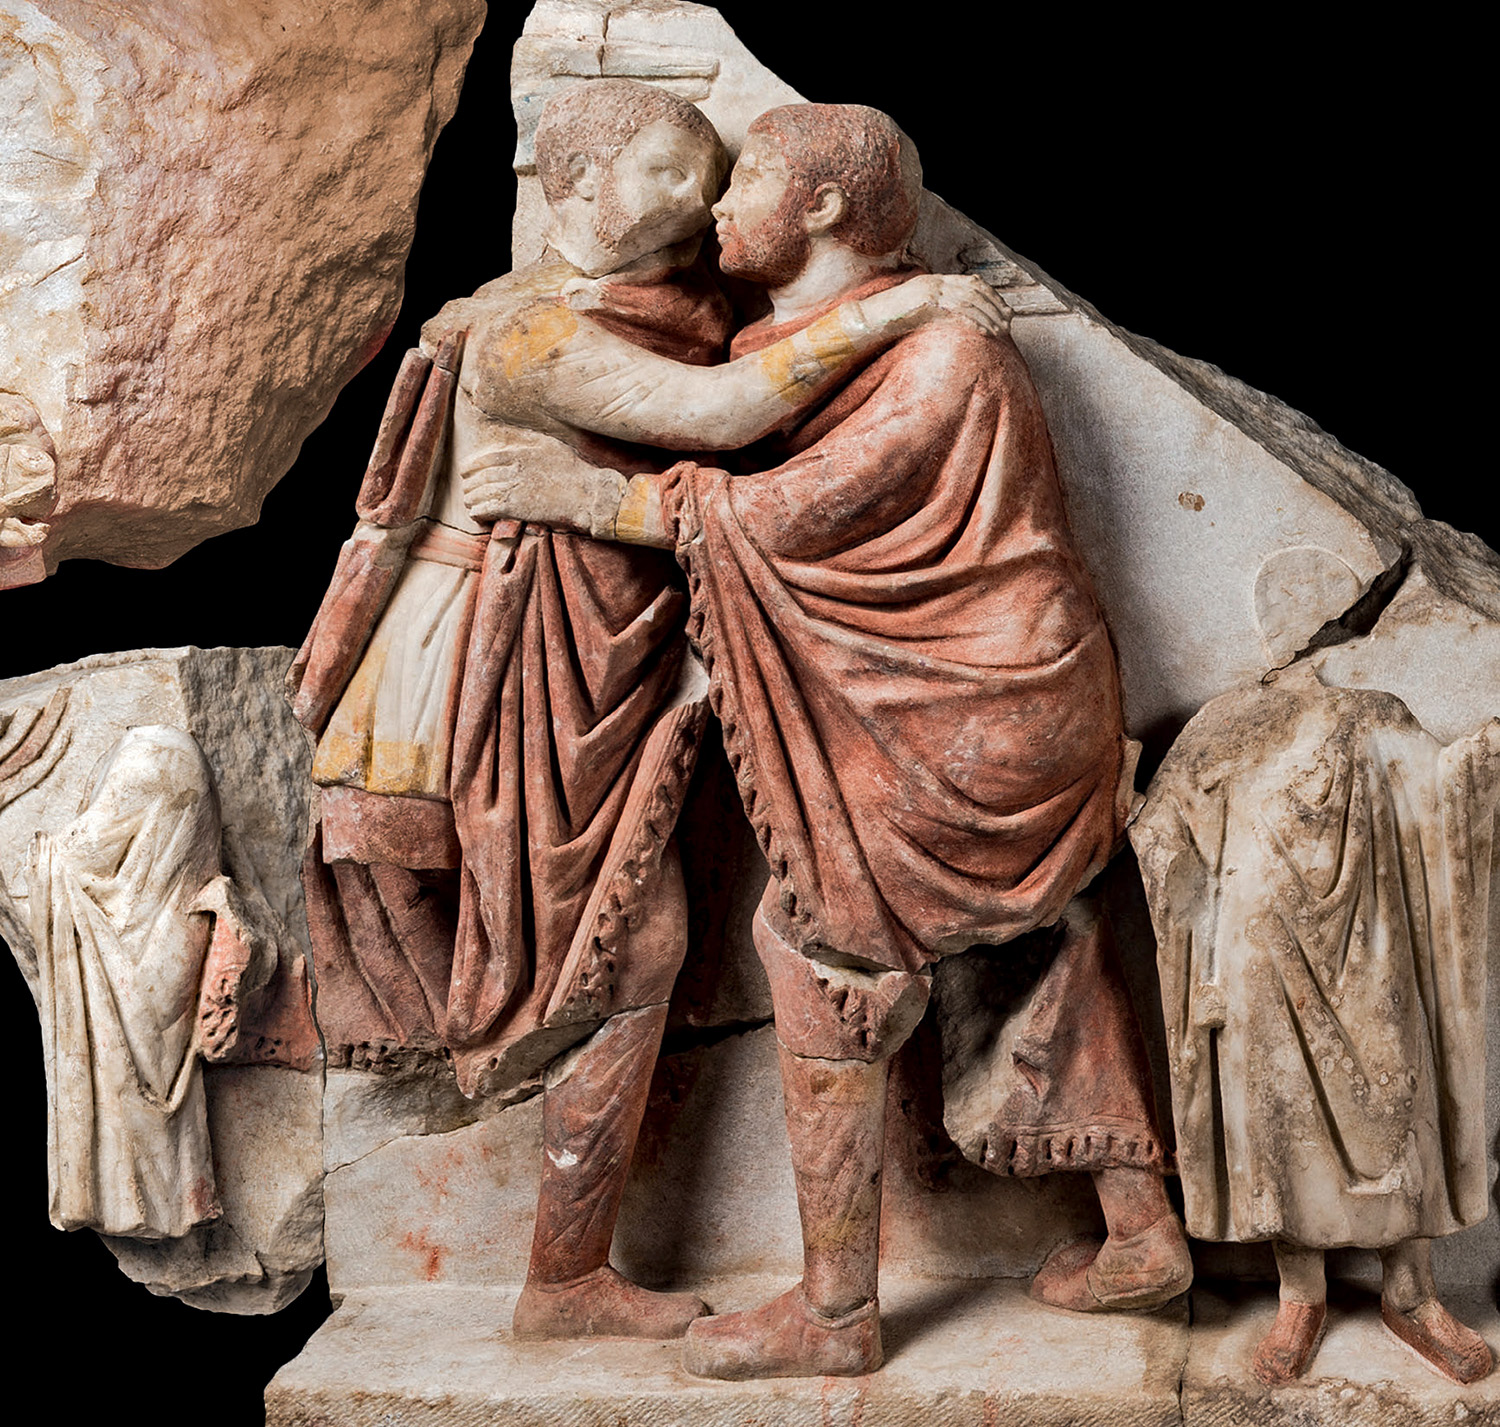 Part of an interior frieze depicting the elder tetrarch Diocletian and the younger tetrarch Maximian embracing in cooperation at the end of a procession, c. 300 C.E., painted marble, 1 m high (Kocaeli Museum, İzmit). Found in excavations of a ceremonial building at İzmit (Nicomedia, Türkeyi) in 2001/2009